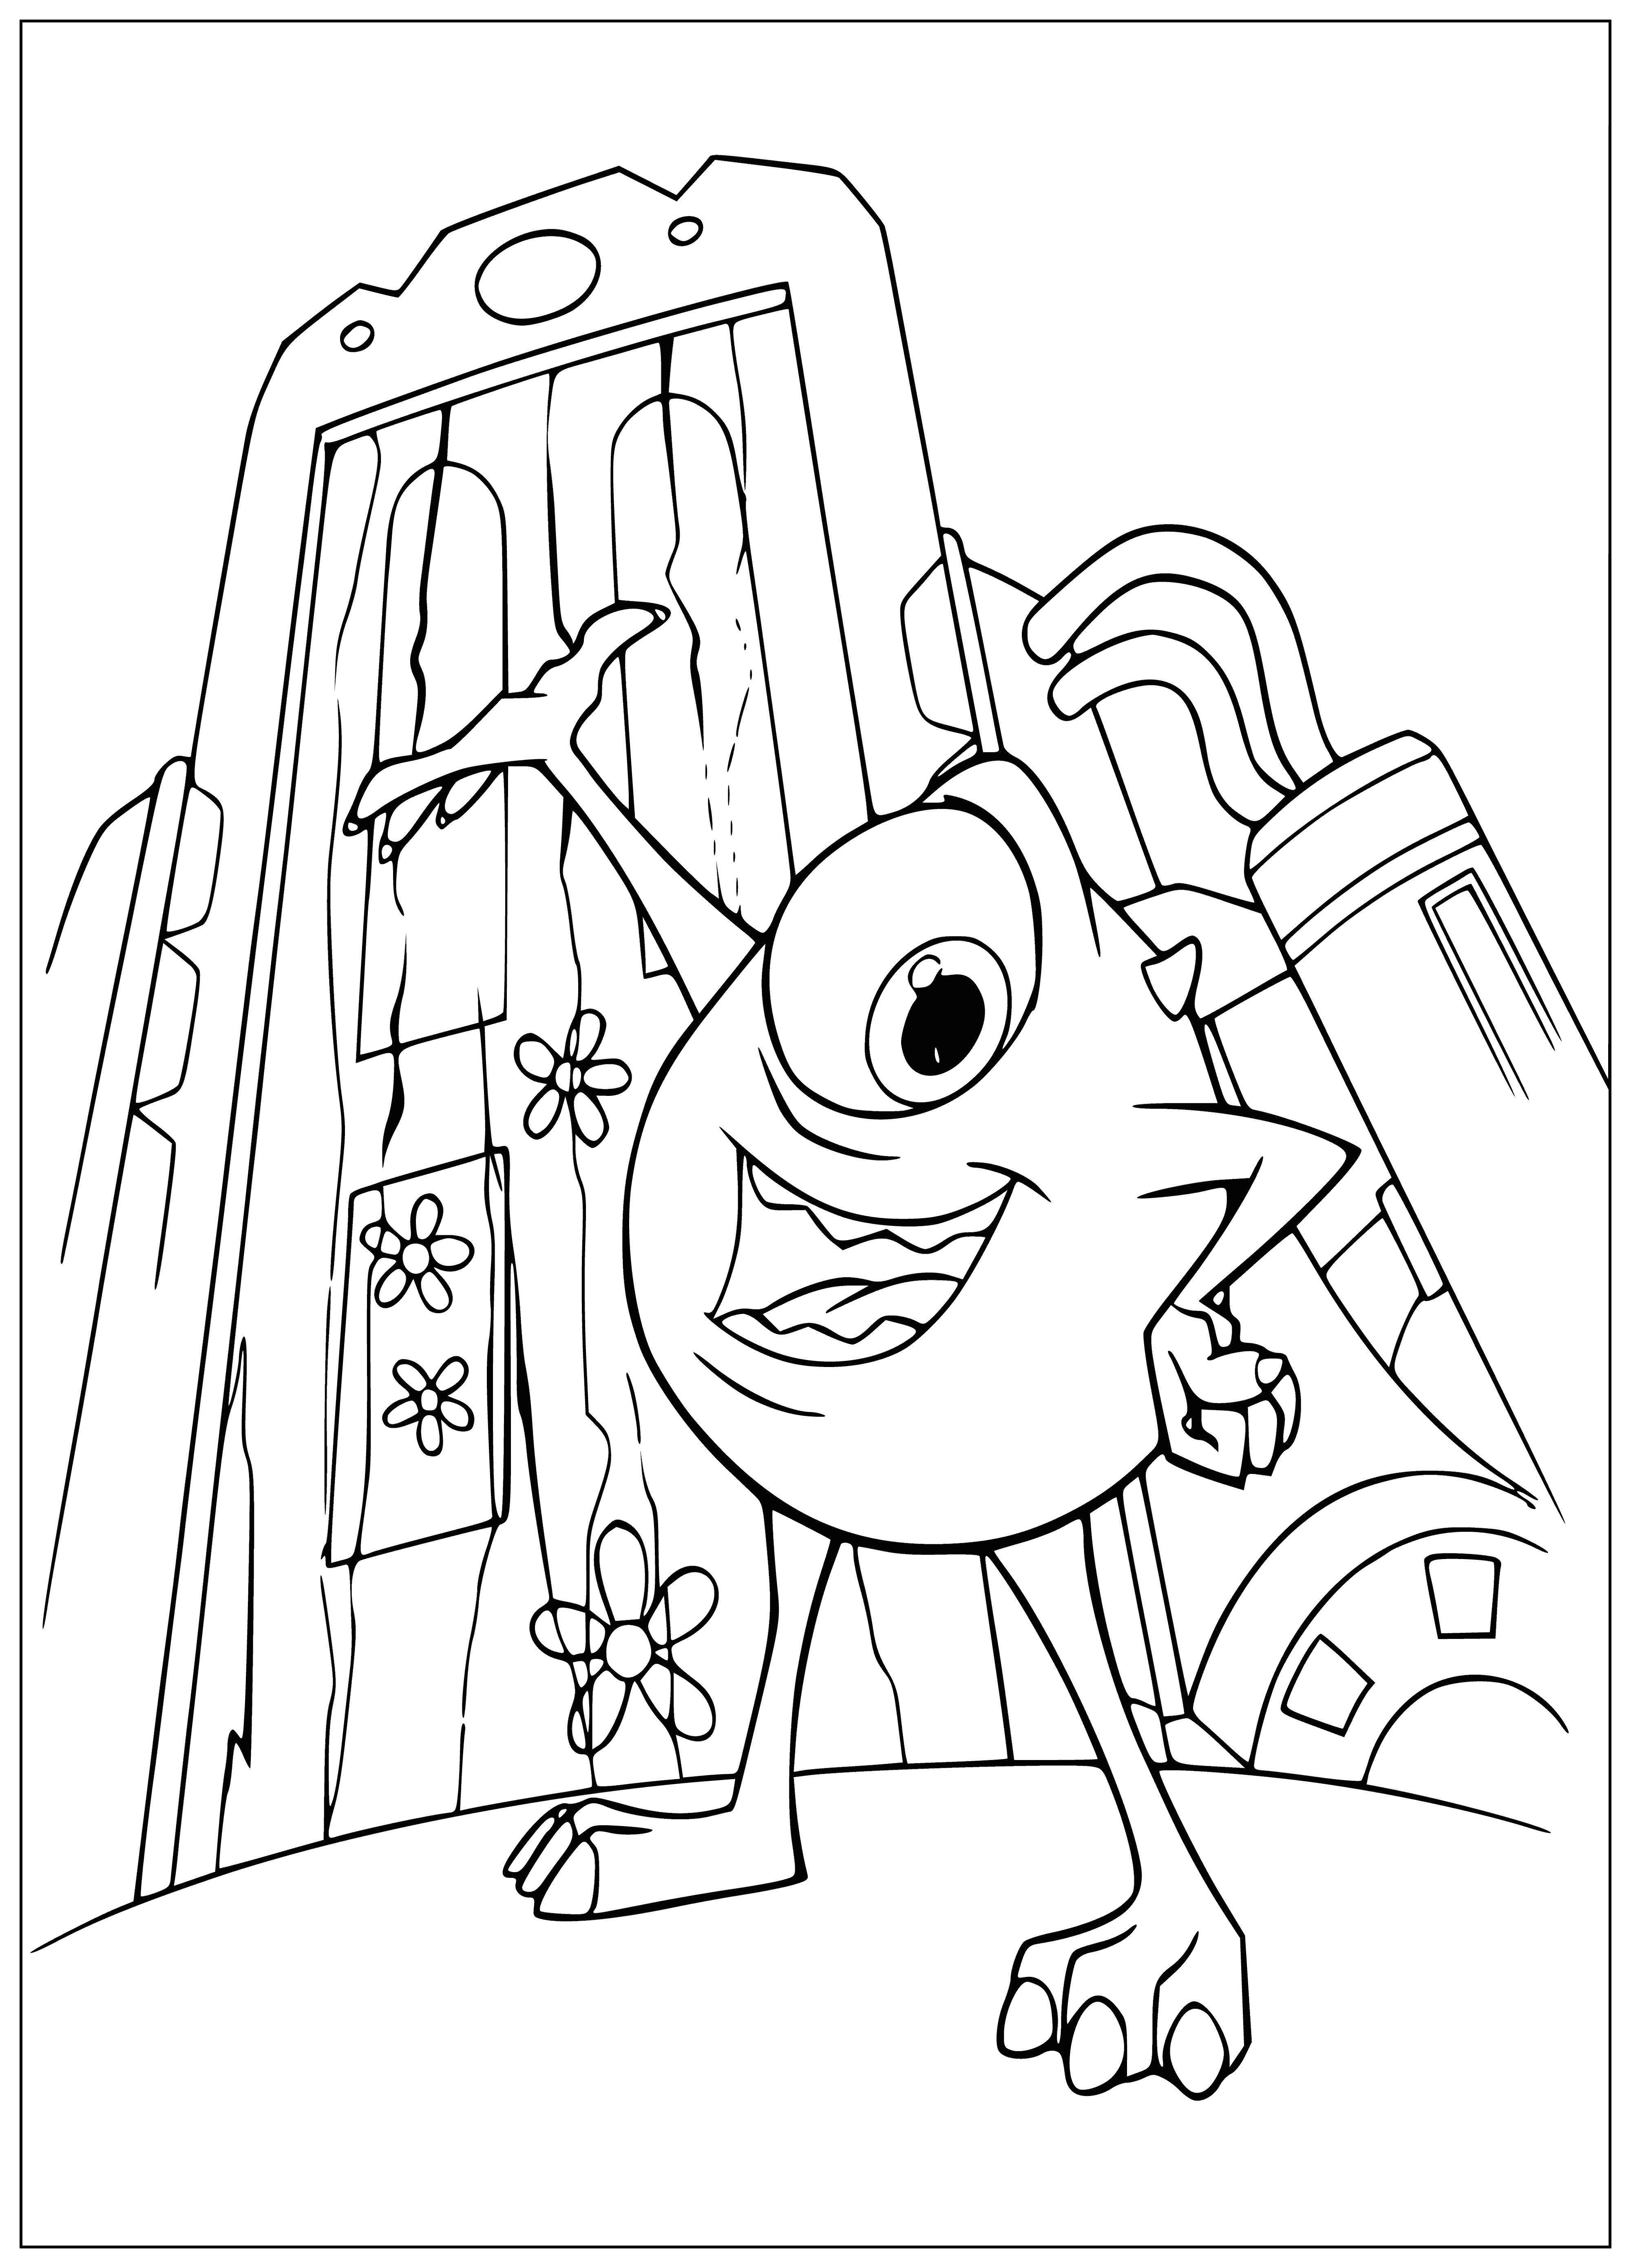 coloring page: The carpenter replaced the rotten wood, hung a new handle and lock, and repainted it to match the rest of the house.

Carpenter replaced rotted wood, hung handle/lock & repainted door to match house.